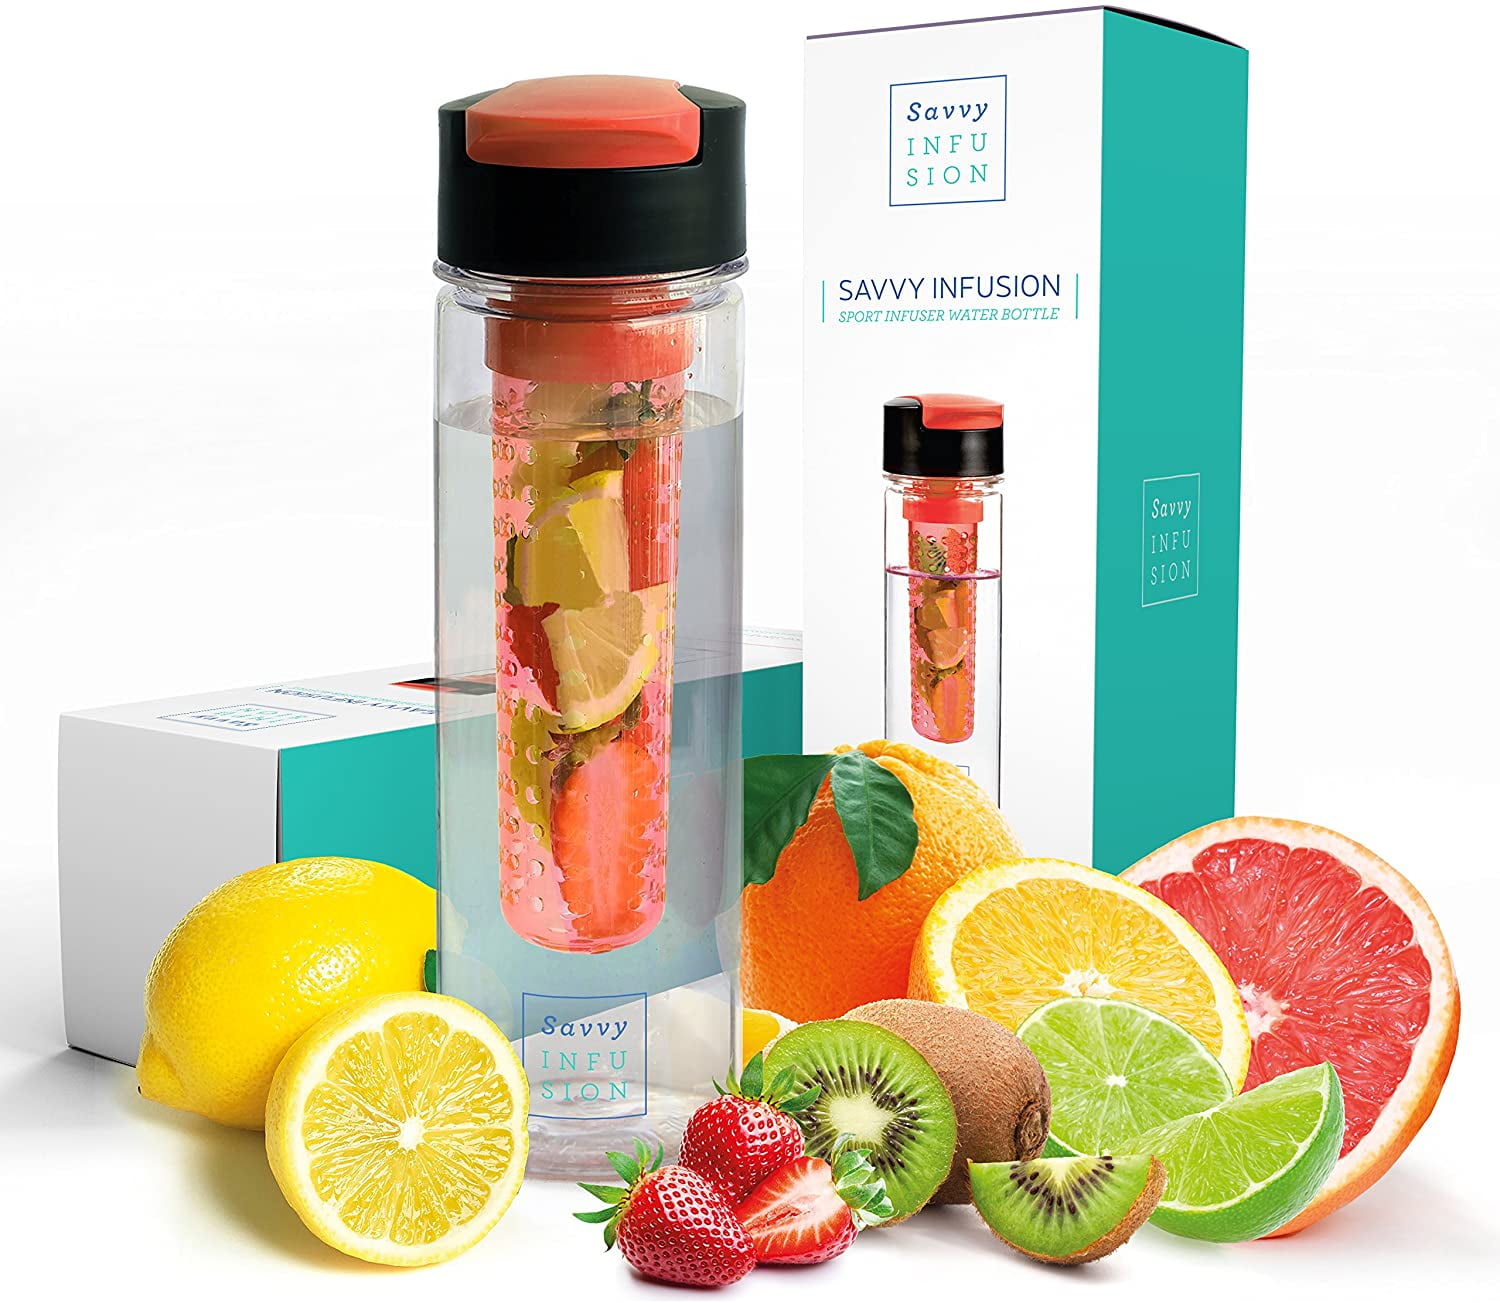 Ultimate Healthy Hydration Gift! Insulating Sleeve & Infusion Recipe eBook NEW Improved Unique Bottom Loading Fruit Infuser Water Bottle Complete Bundle Includes Bottle Brush Leak Proof Sweat Proof 